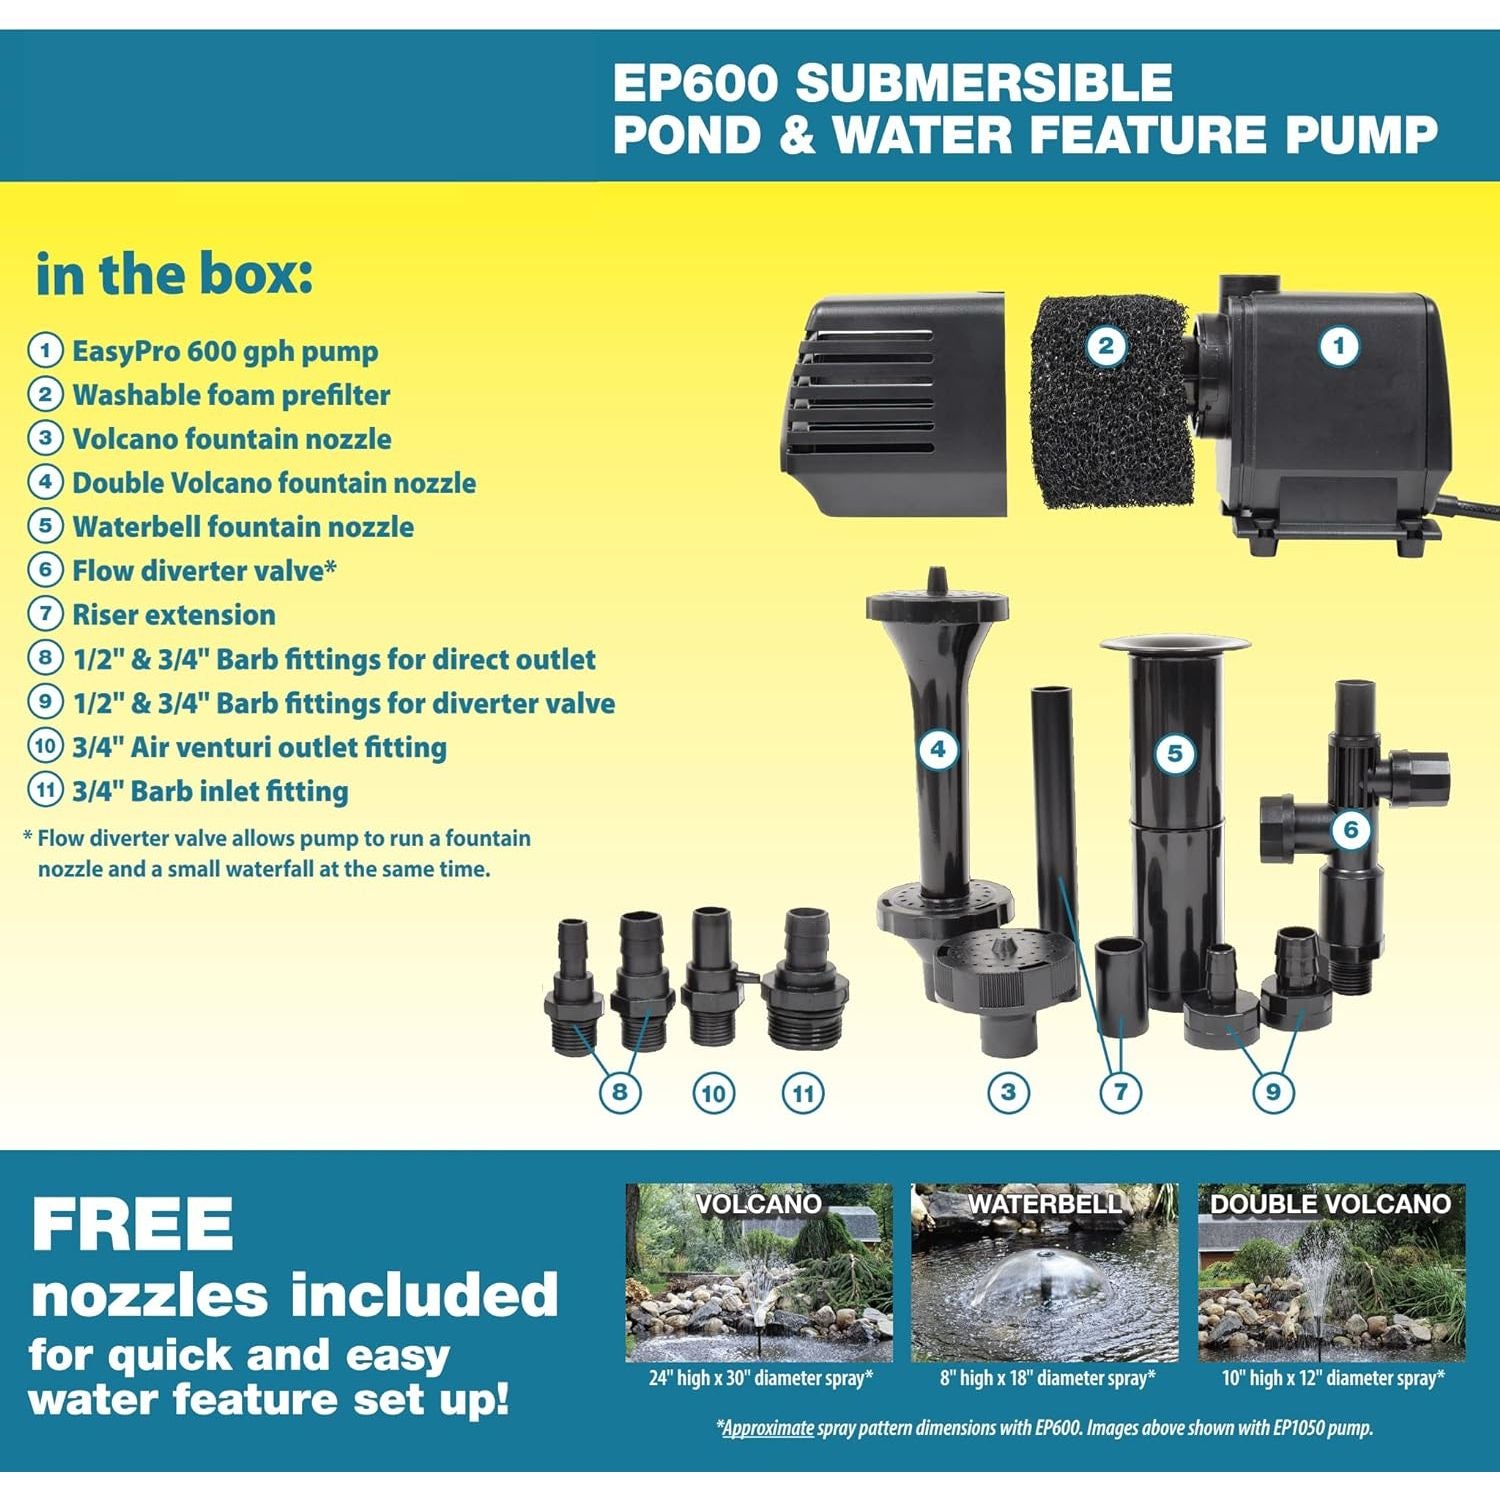 EP600 Submersible Mag Drive Pump 600 GPH | Reliable | Quiet & Energy Efficient - American Pond Supplies Easy Pro Submersible Pumps Submersible Pumps